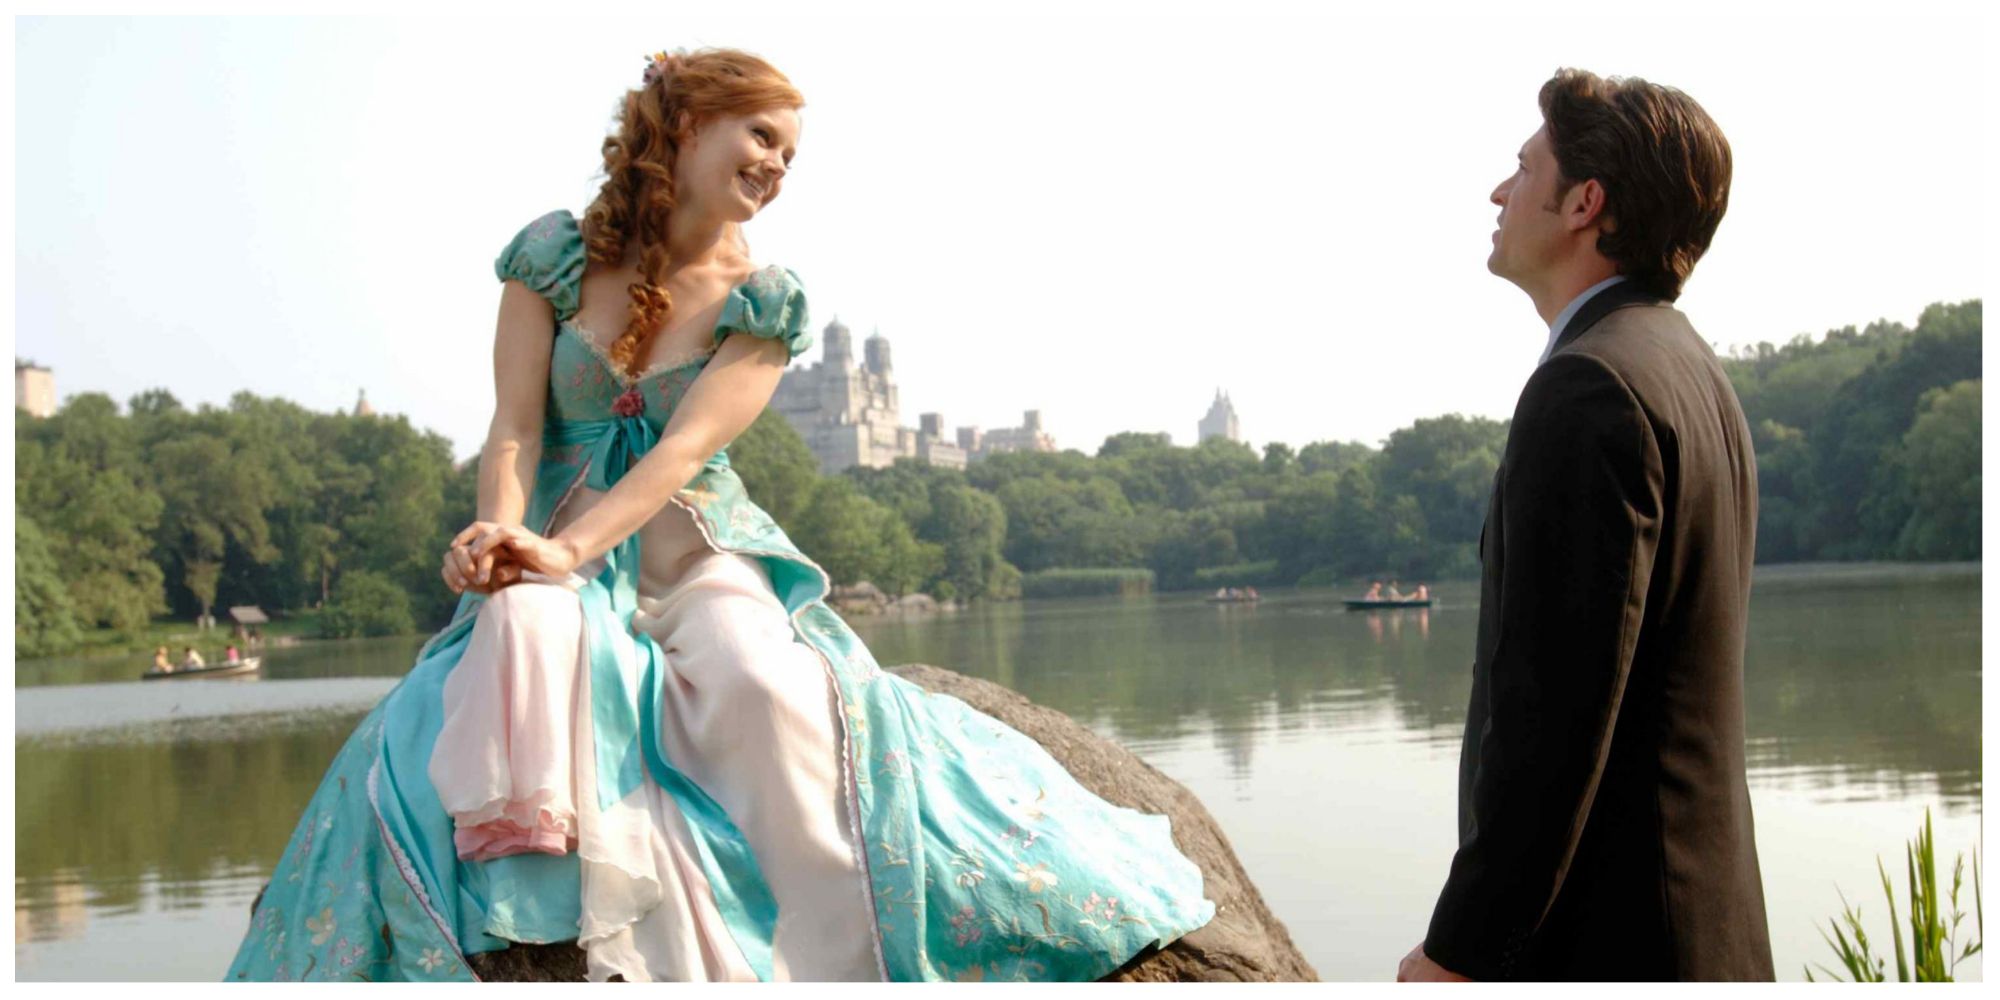 Giselle and Robert in the park in Enchanted (2007)